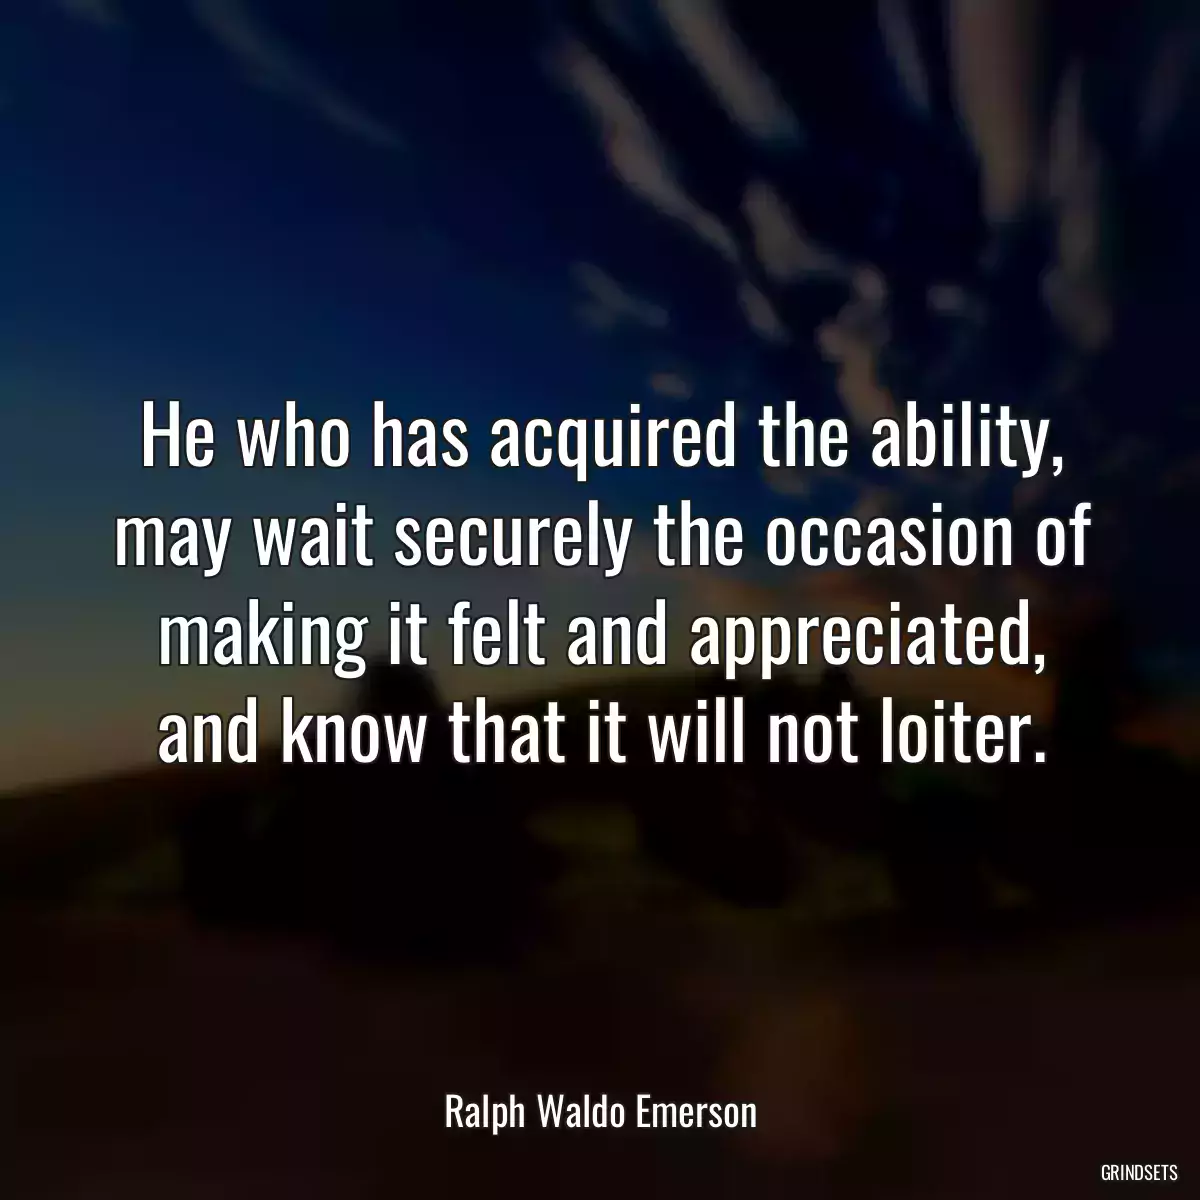 He who has acquired the ability, may wait securely the occasion of making it felt and appreciated, and know that it will not loiter.